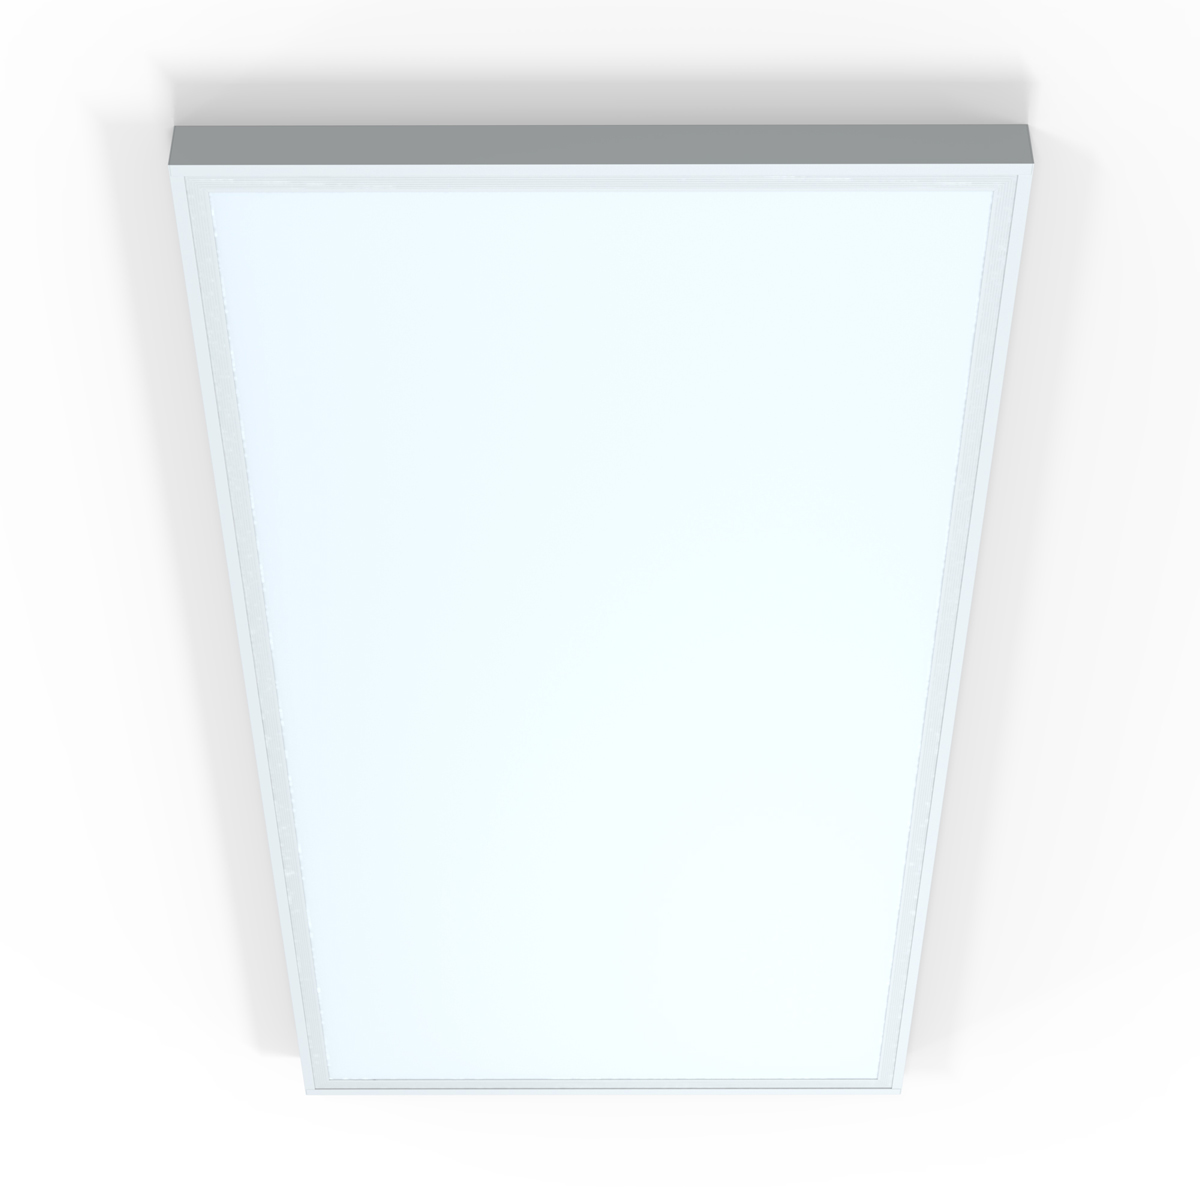 View 1200 x 600mm Surface Mounted LED Panel Light 6000K information